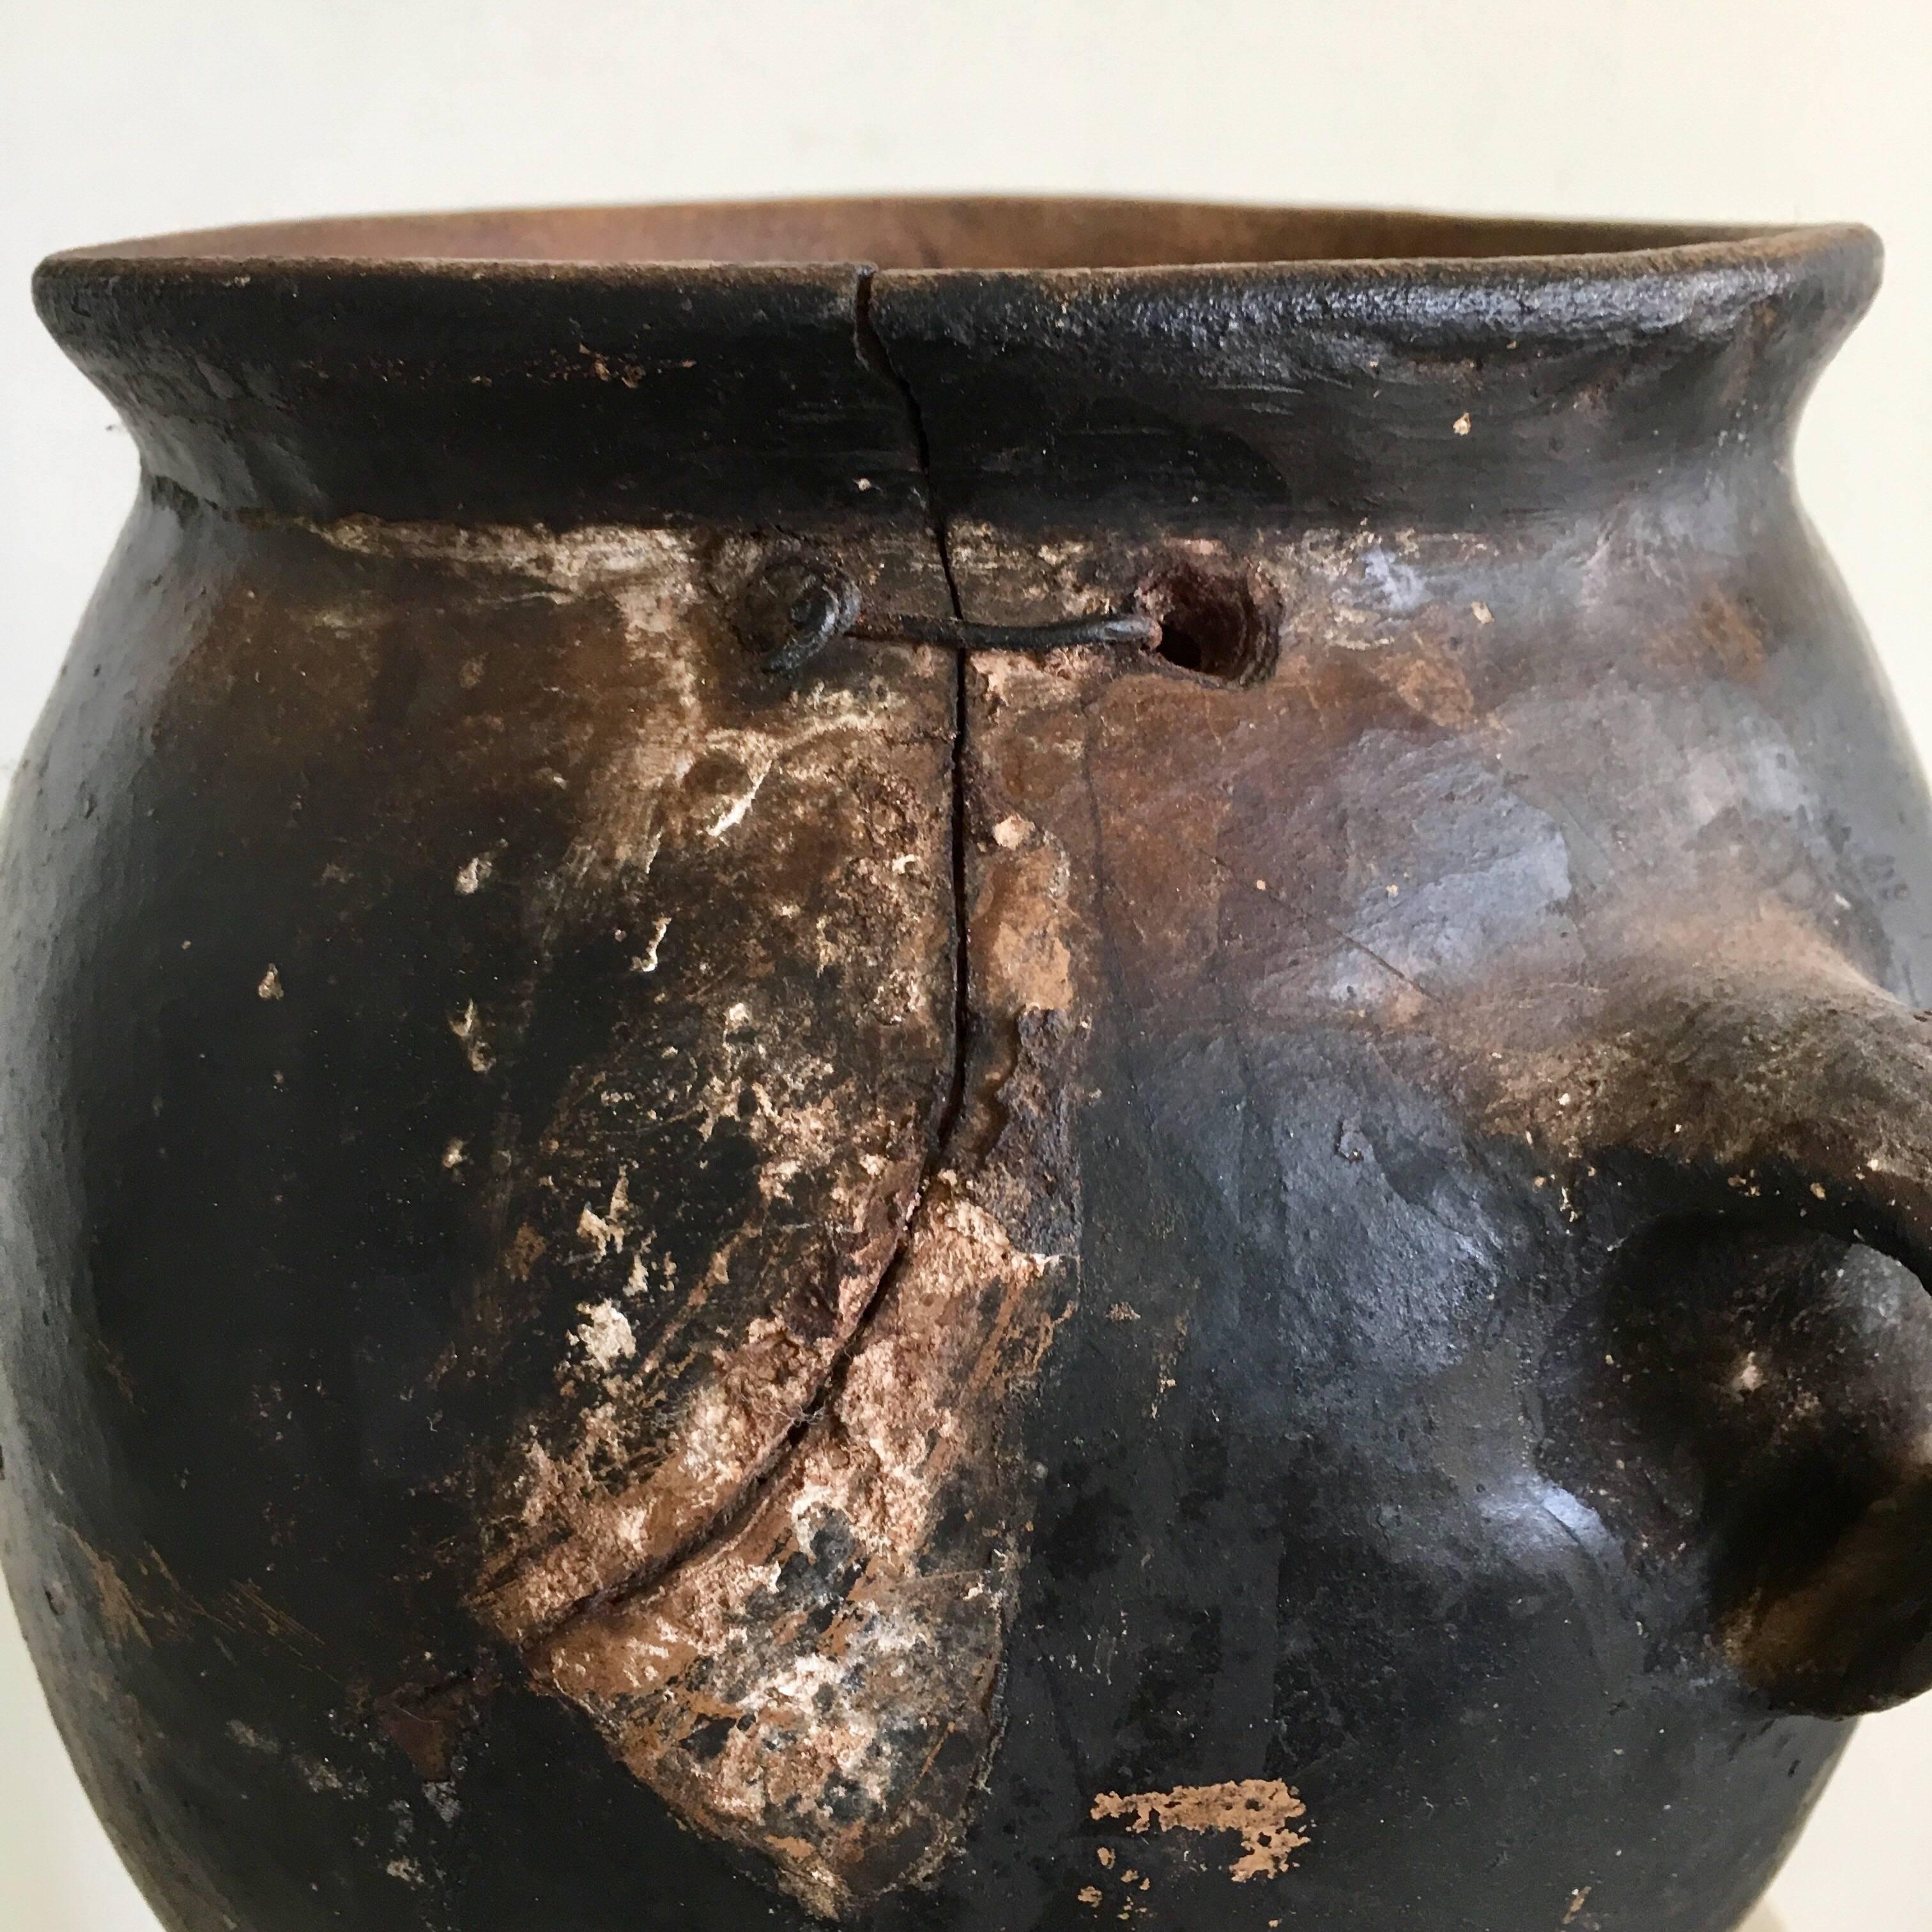 Blackened pot from Los Reyes, Mexico with original staple repair. Primitive design from the Popoloca culture that has remained intact for the last millenia.